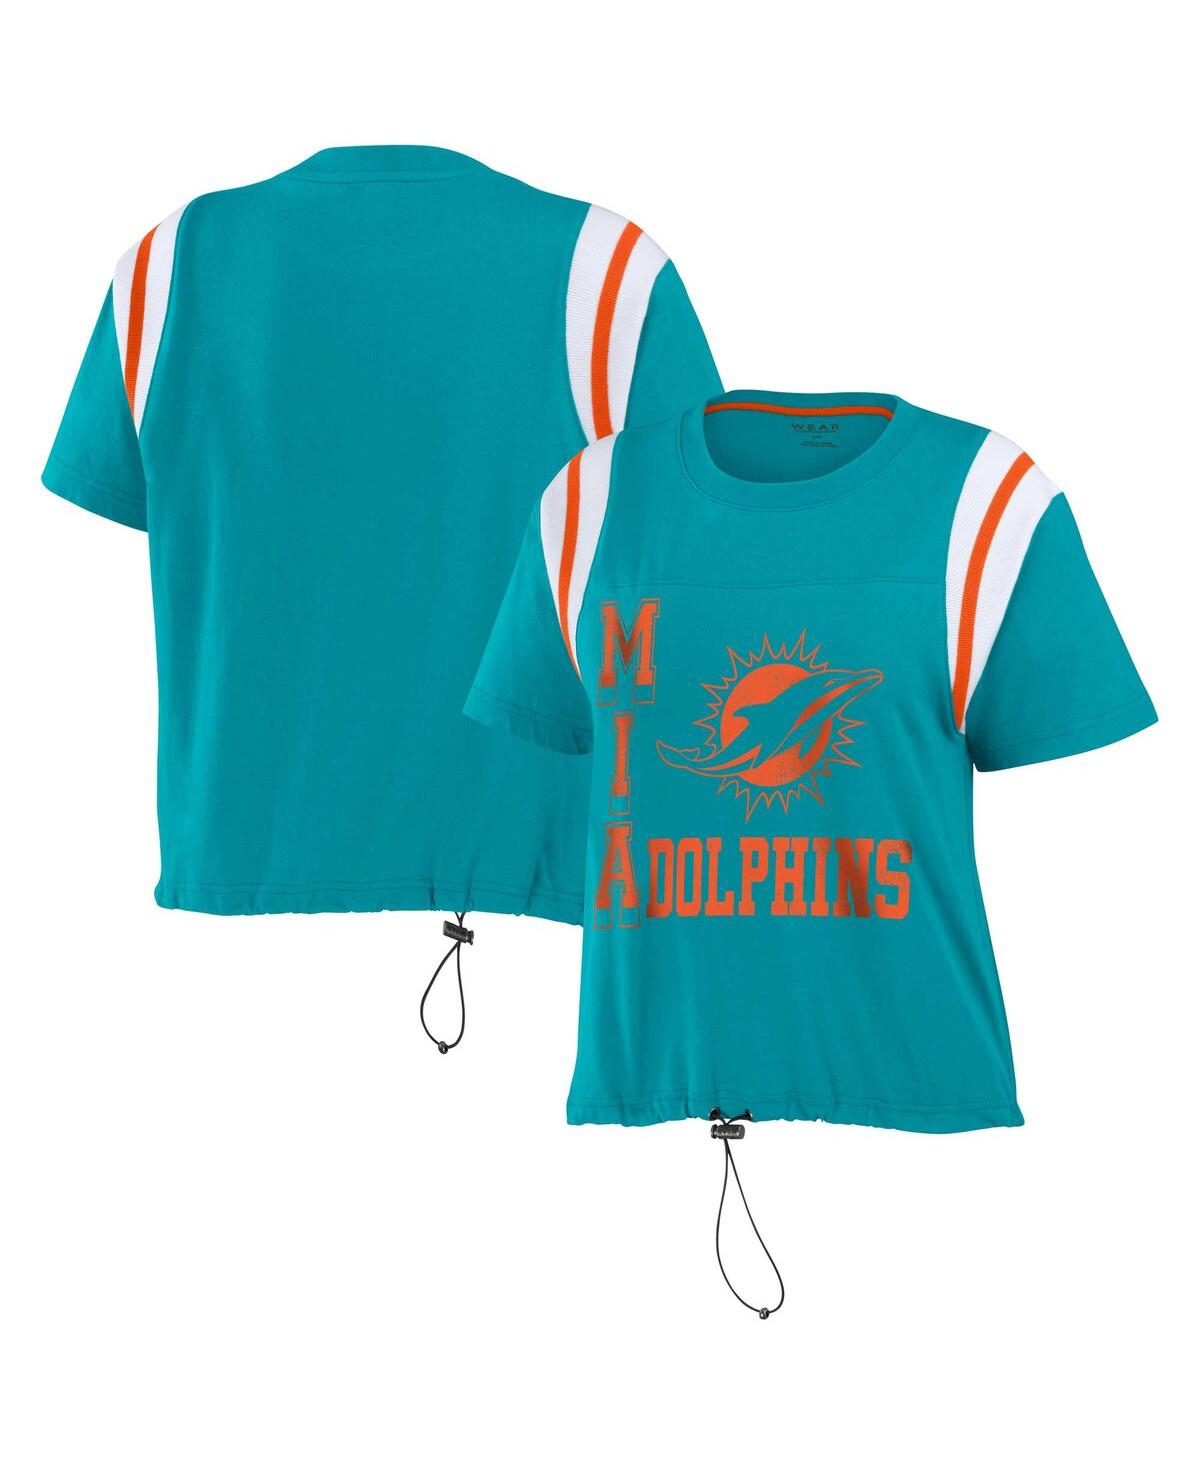 WEAR BY ERIN ANDREWS WOMEN'S WEAR BY ERIN ANDREWS AQUA MIAMI DOLPHINS CINCHED COLORBLOCK T-SHIRT